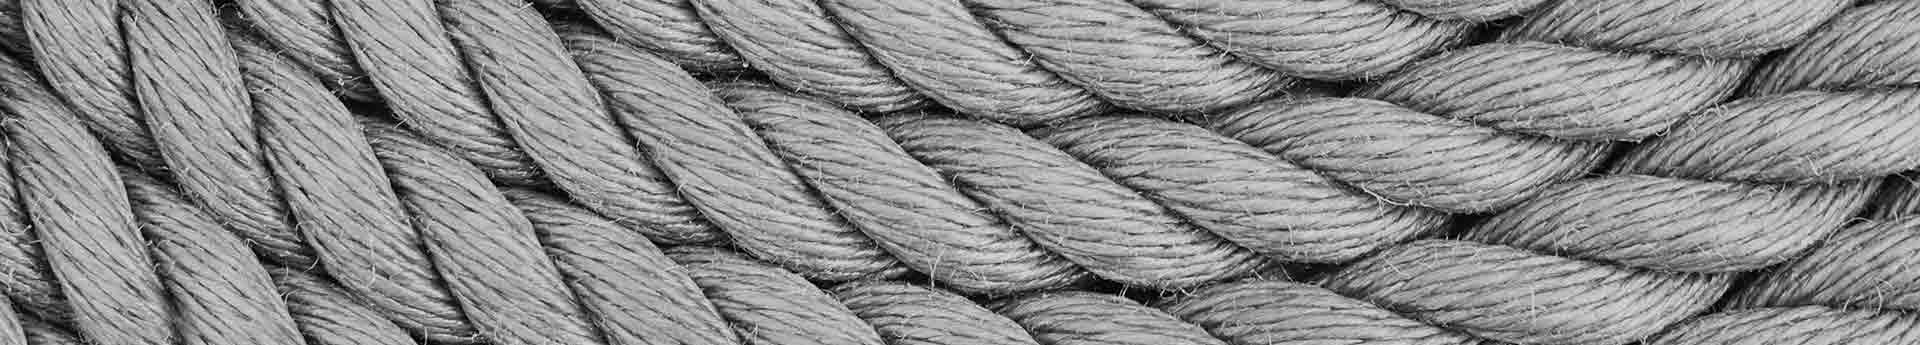 Twisted Manilla rope, many diameters